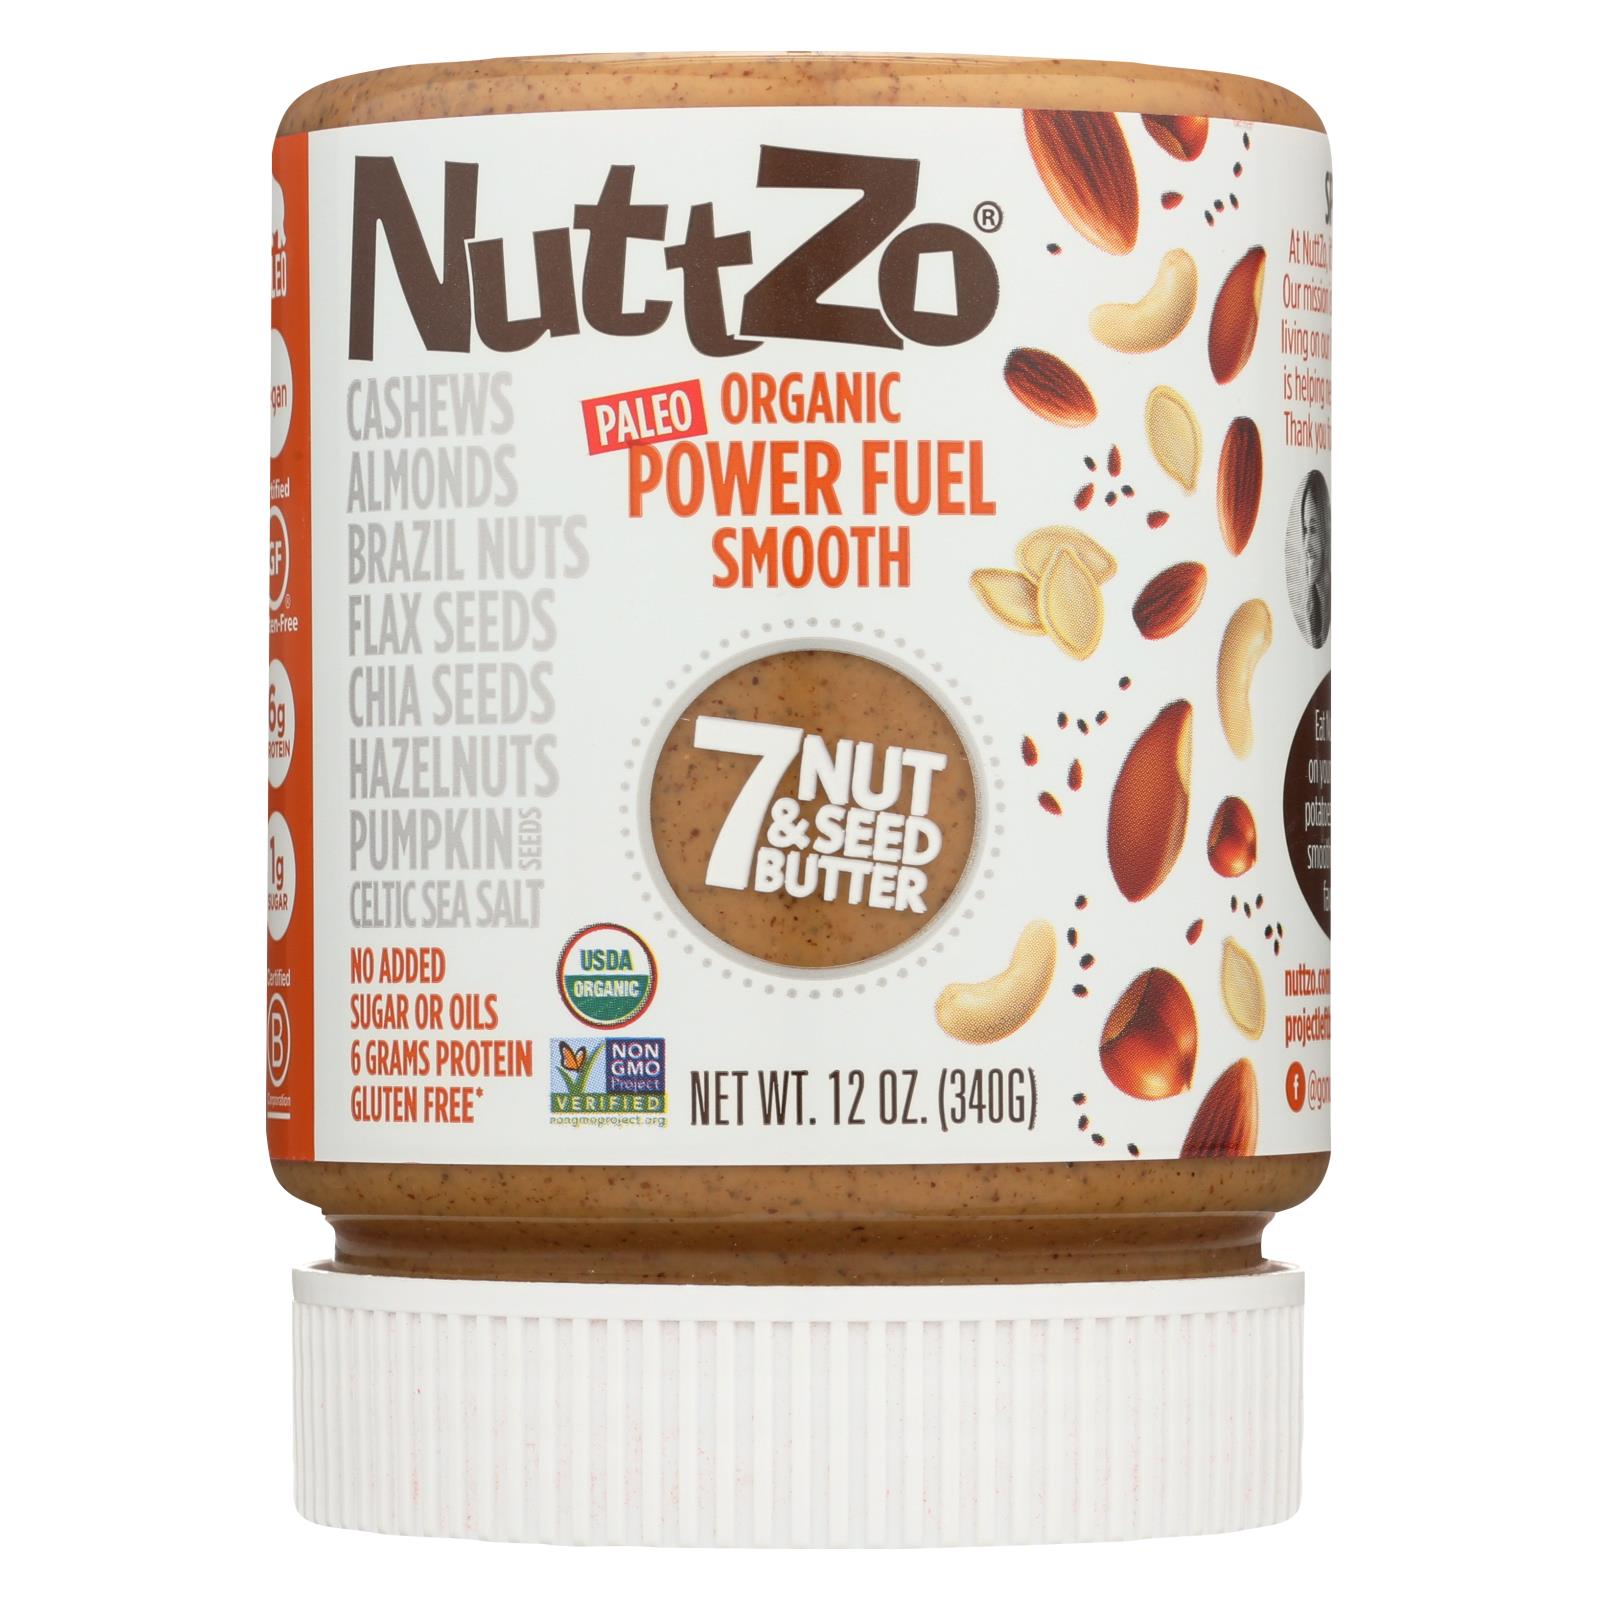 Nuttzo Seven Nut & Seed Butter Power Fuel Smooth - Case of 6 - 12 OZ